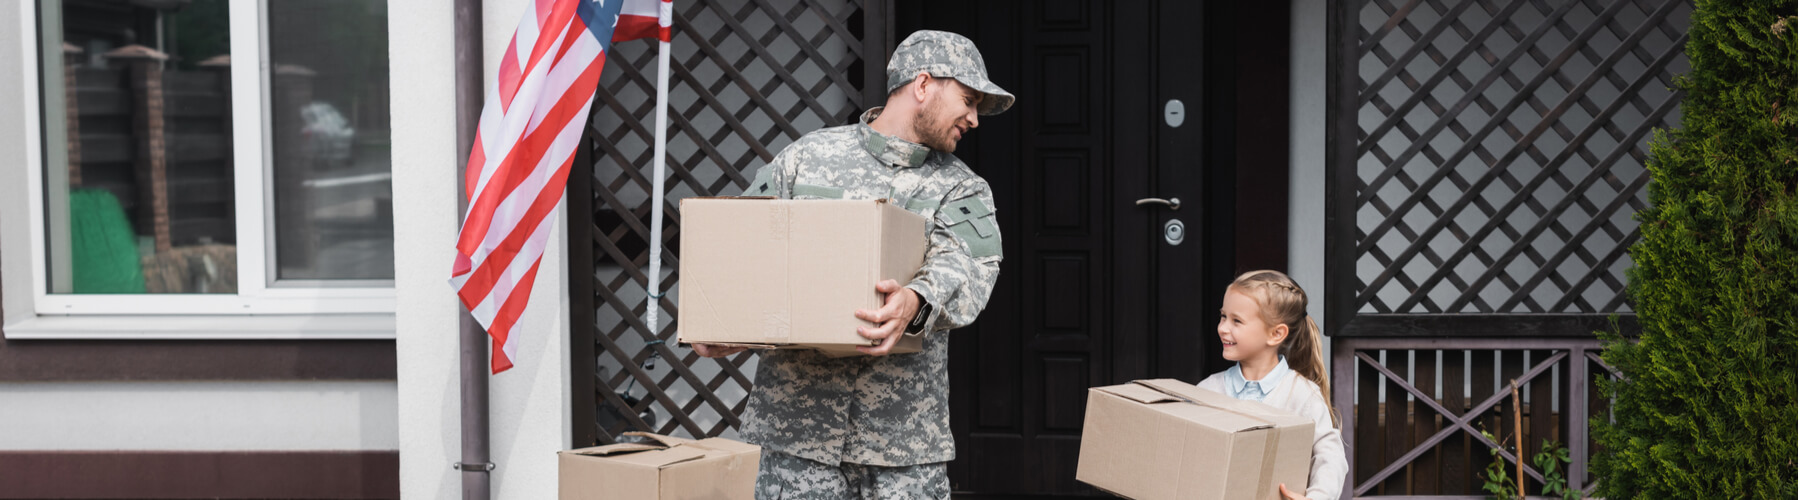 Father in military uniform and daughter holding cardboard boxes near house with american flag, moving in or out of military house